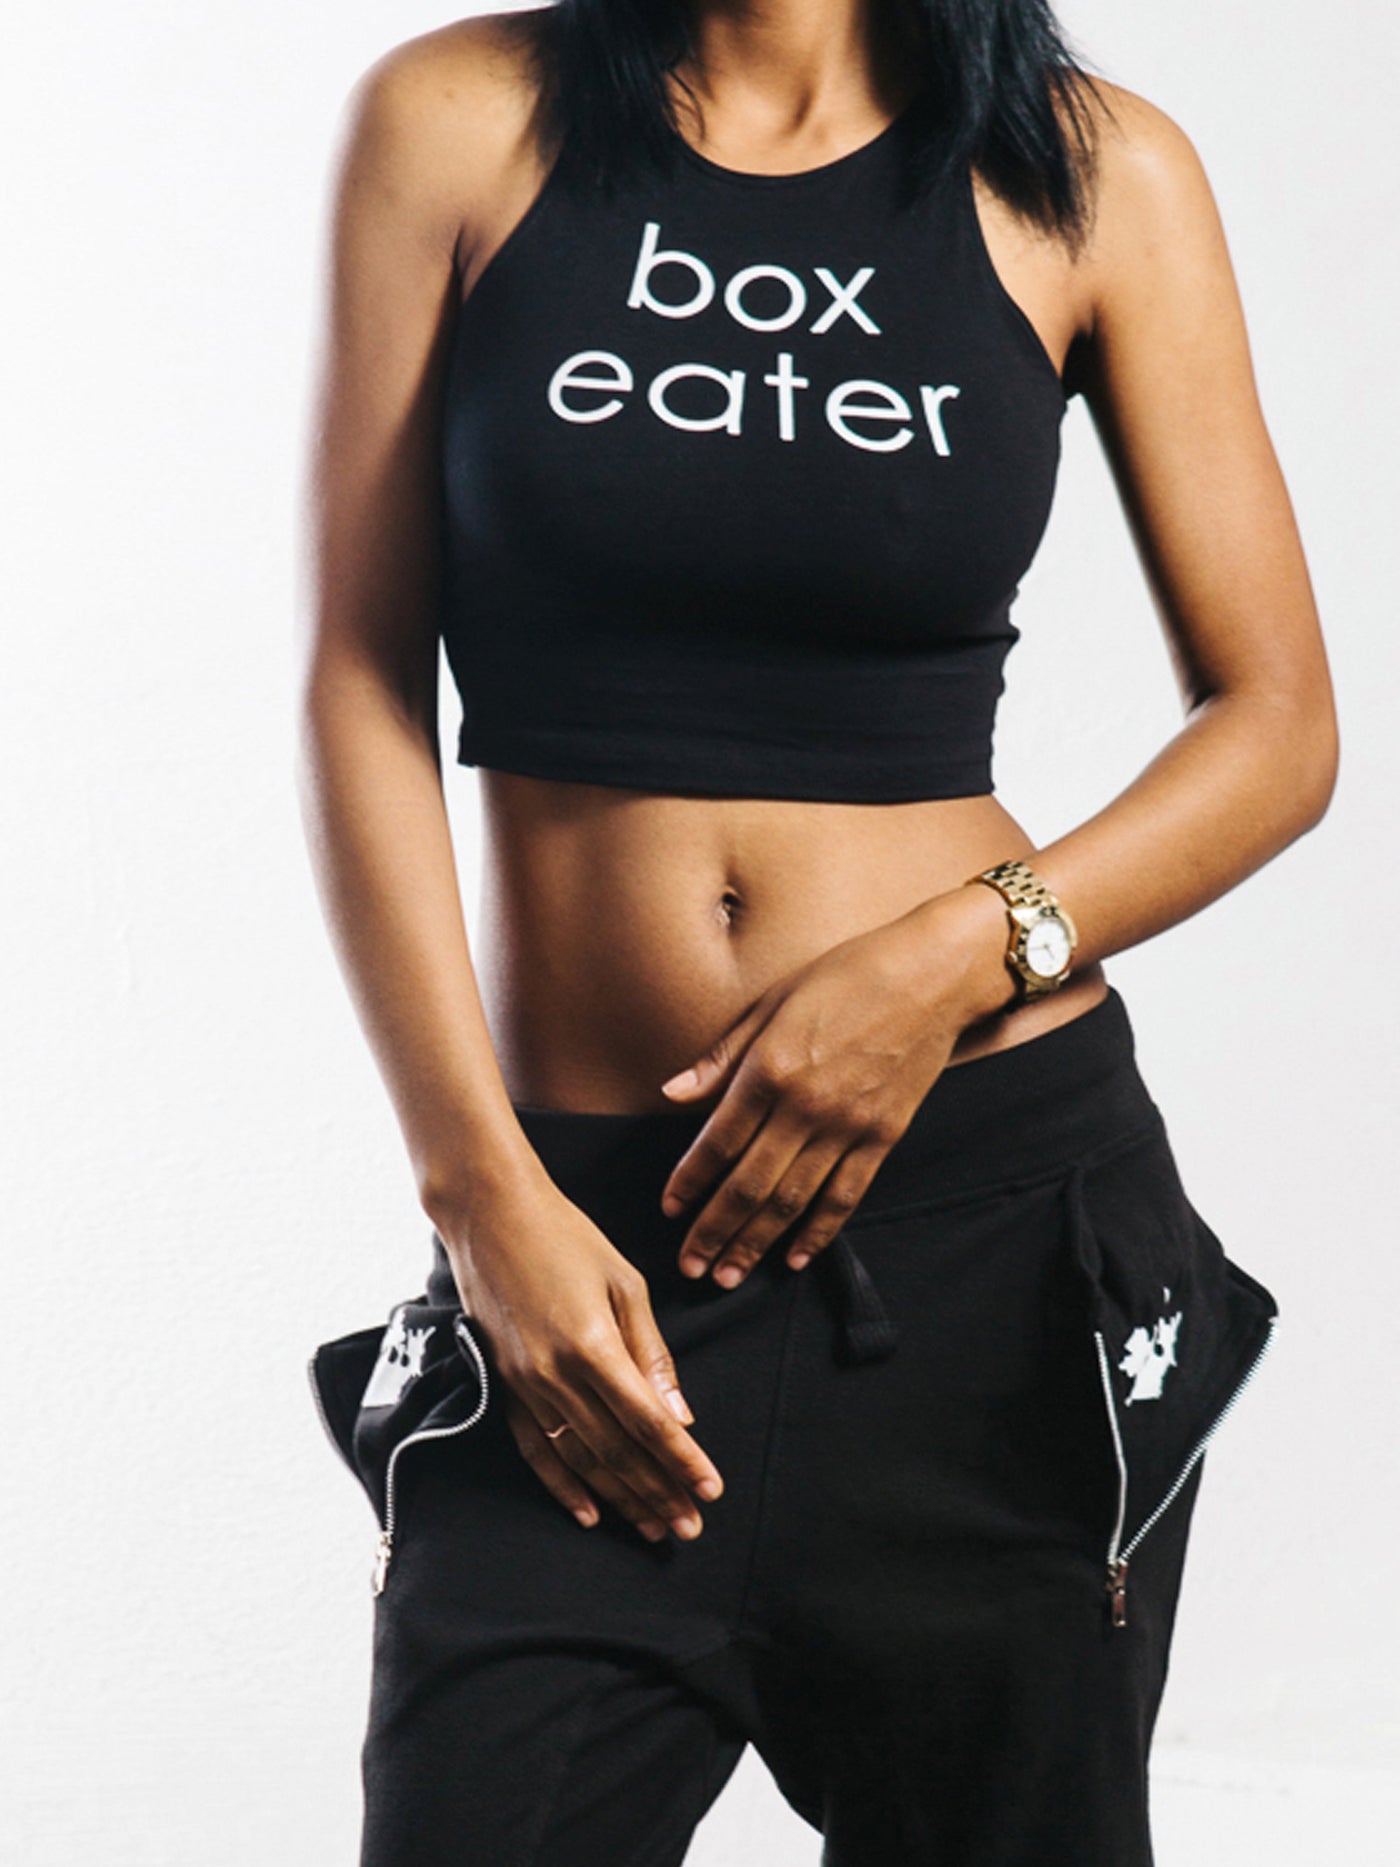 BOX EATER CROP TOP by STUZO CLOTHING